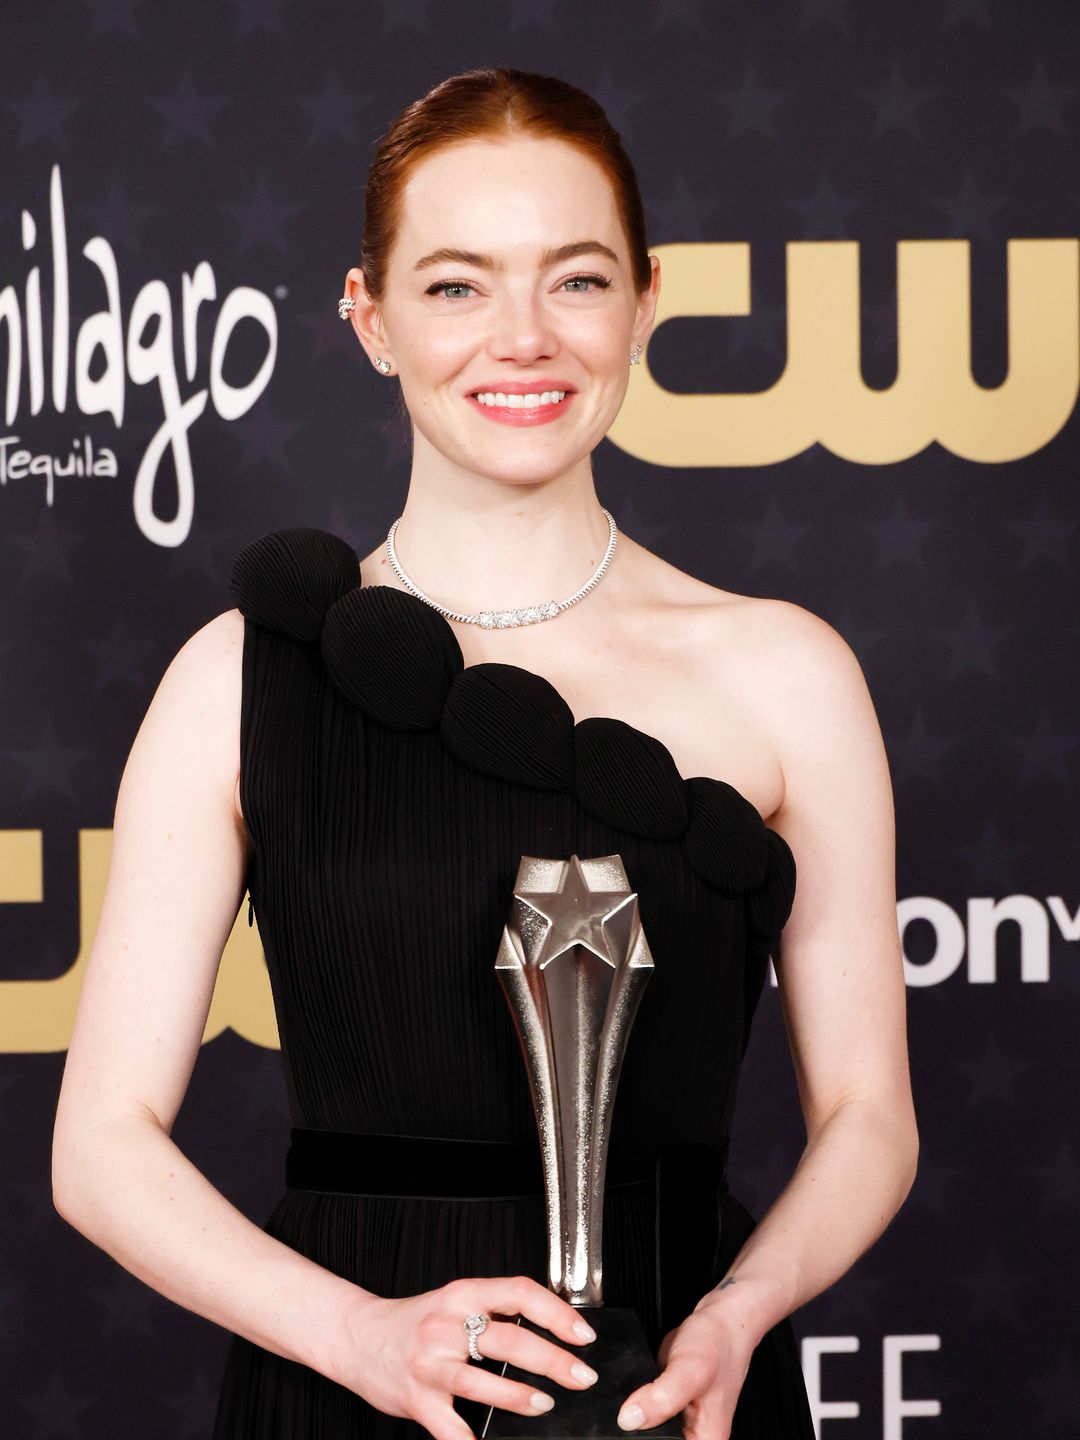 Emma Stone smiling in a black dress with her Critics' Choice Award 